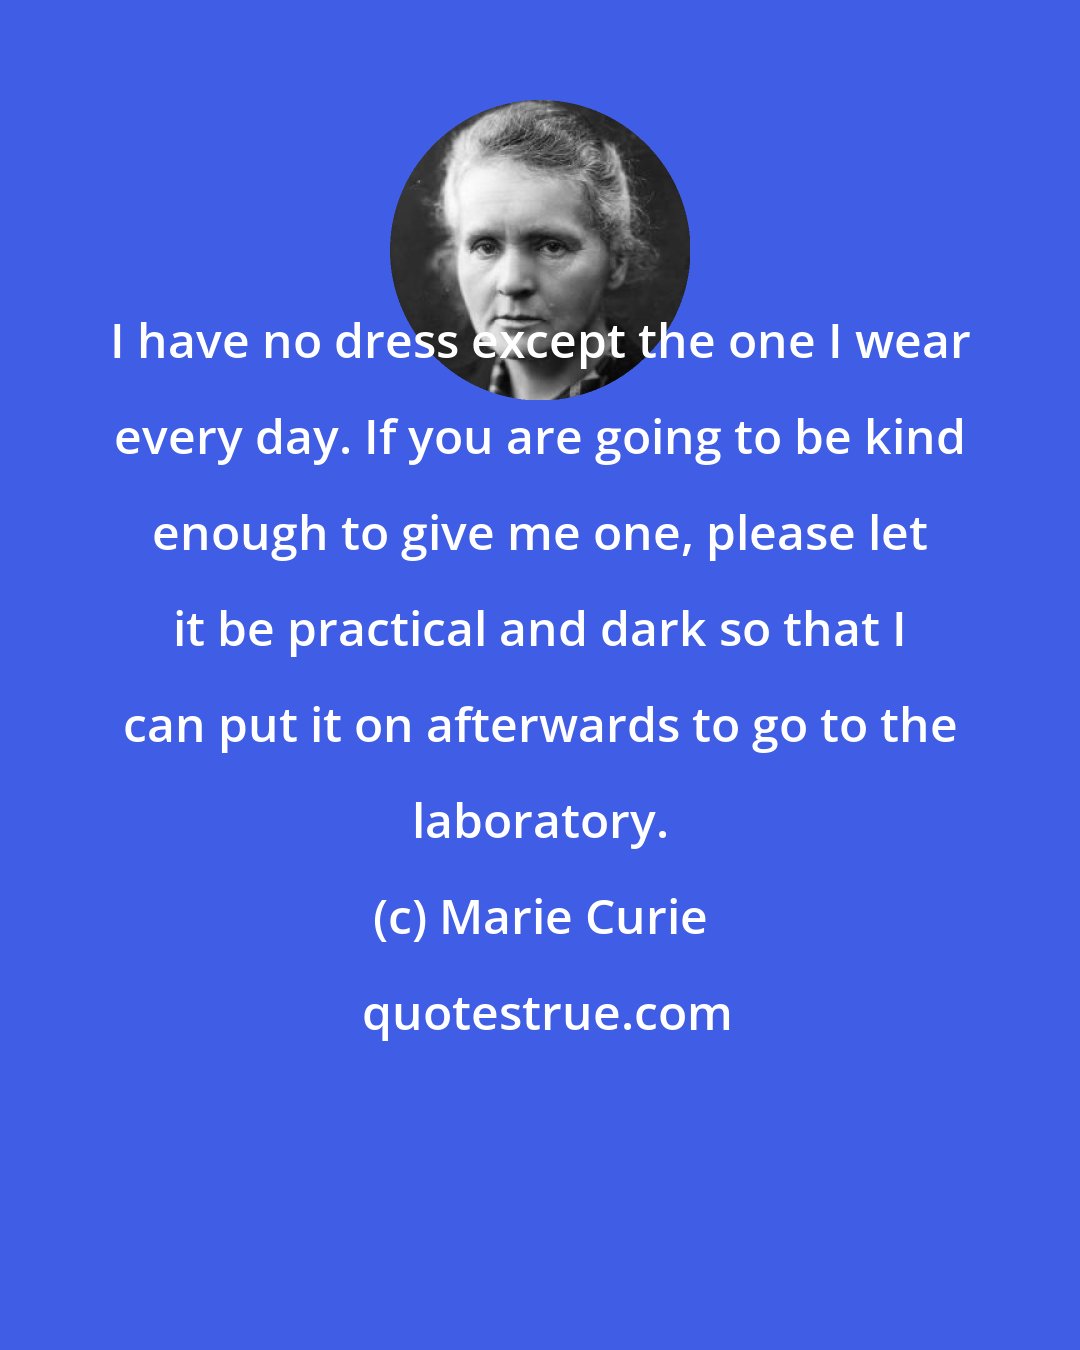 Marie Curie: I have no dress except the one I wear every day. If you are going to be kind enough to give me one, please let it be practical and dark so that I can put it on afterwards to go to the laboratory.